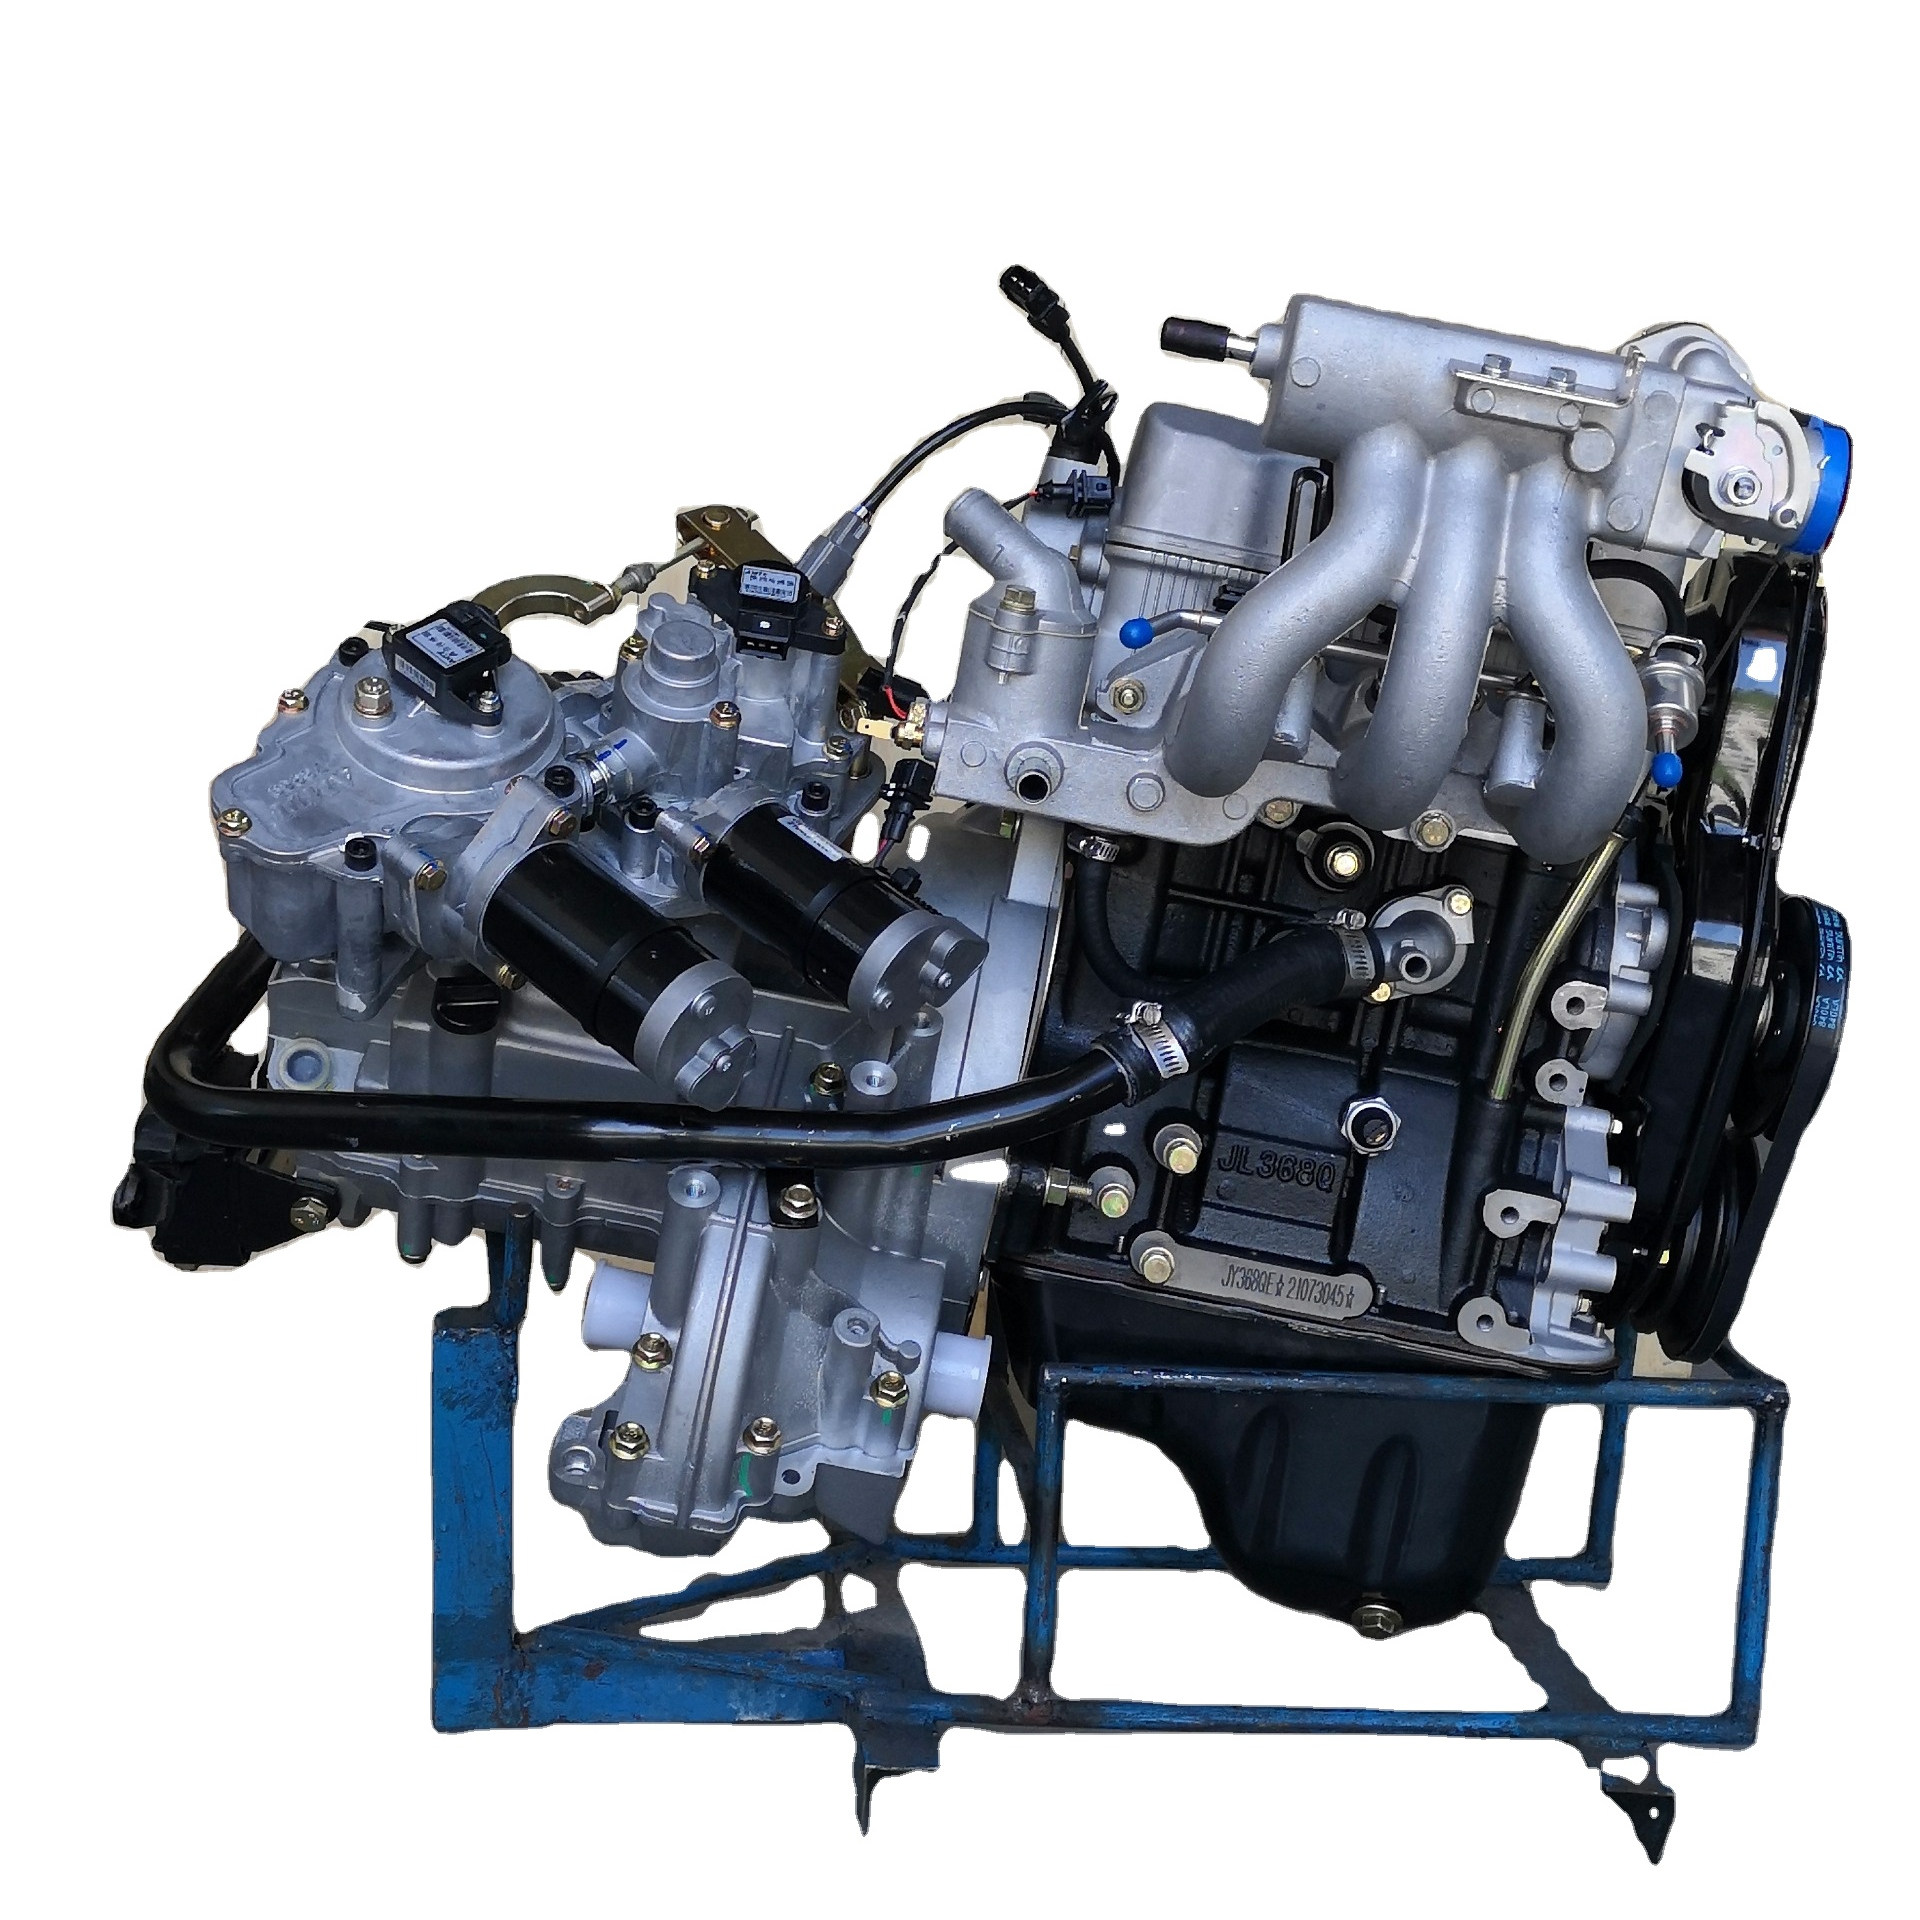 DAYANG Brand Car Engine 800cc water cooled engine Mini Truck uto Spare Parts 368 gasoline petrol Engine